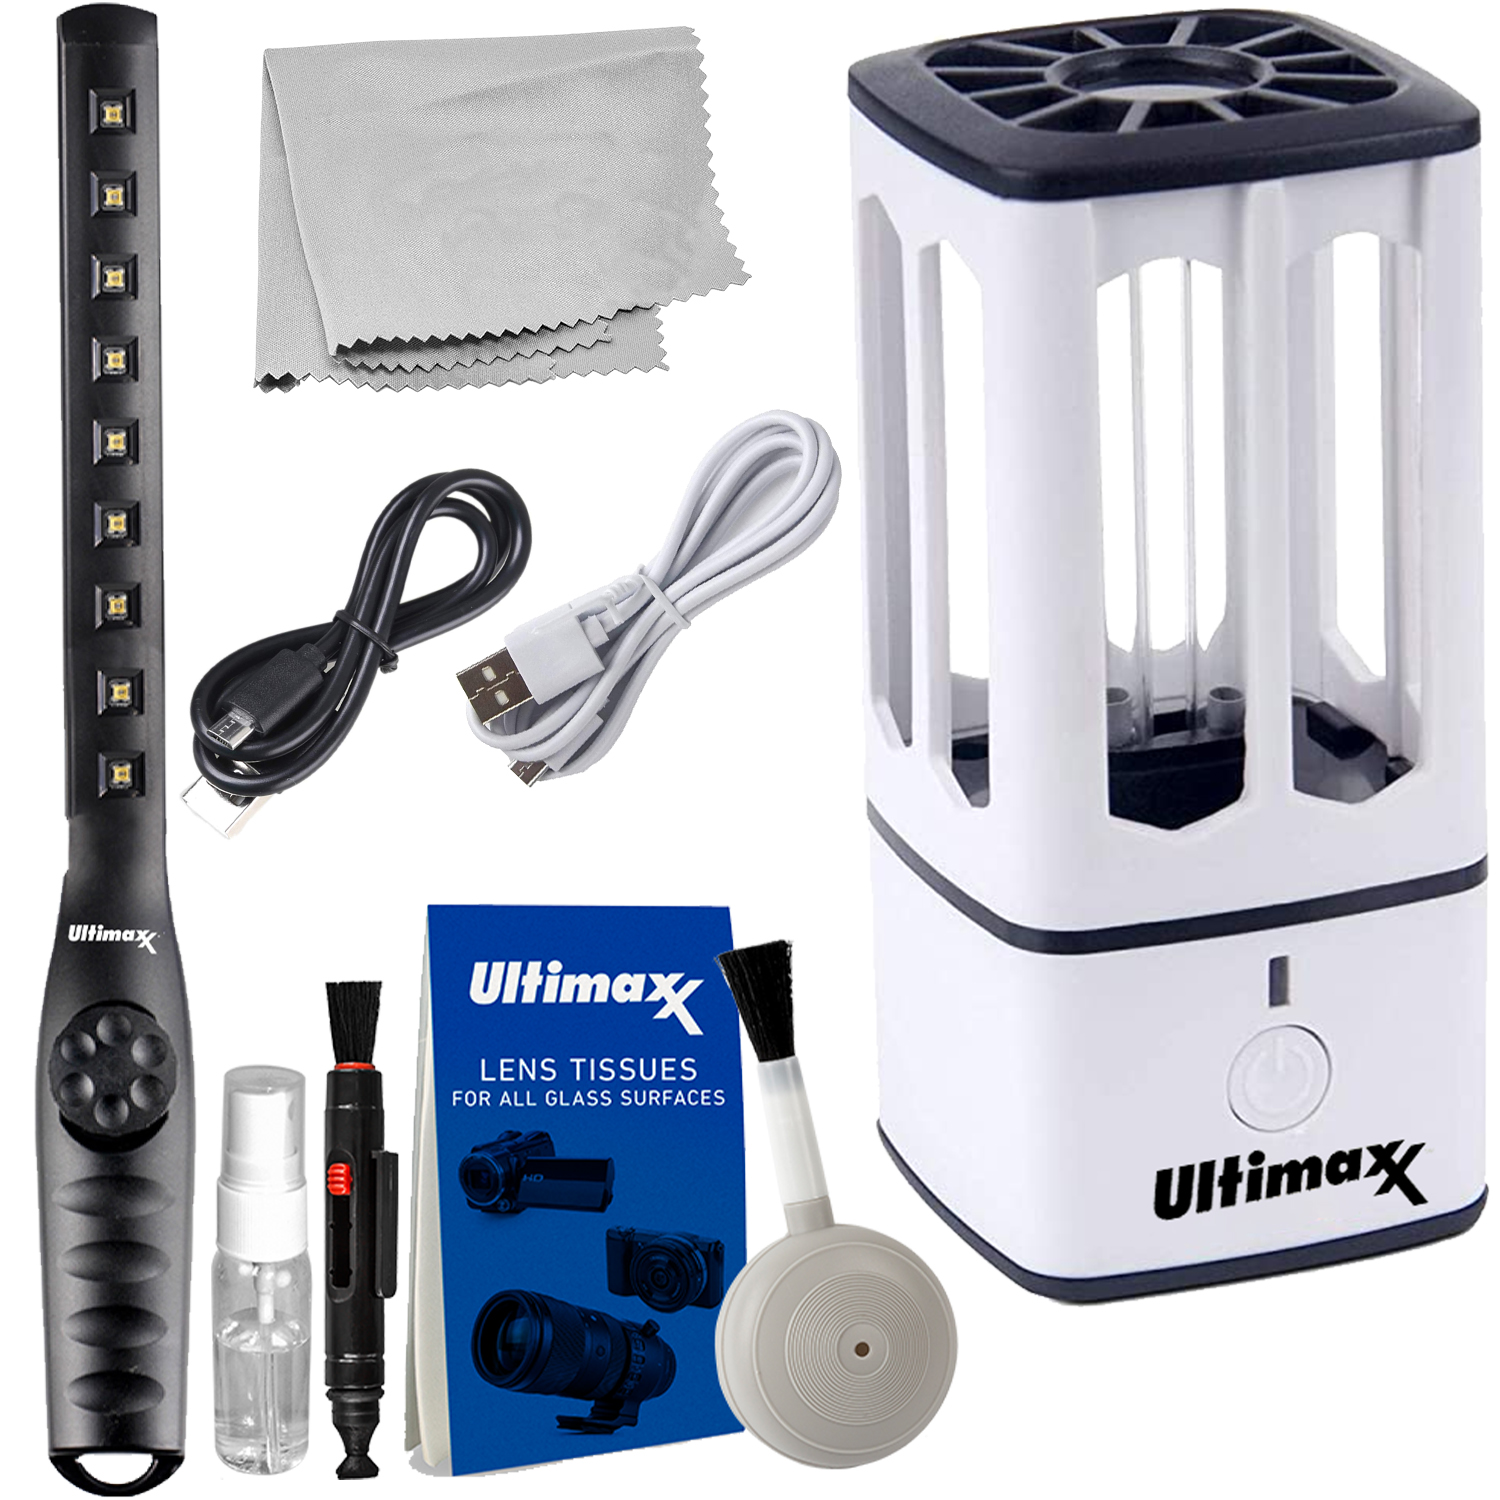 Ultimaxx Mini Portable UV Disinfecting Lamp with Travel Essentials Bundle - Includes: Ultimaxx Rechargeable Handheld UV-C Wand w/ 9 UV Bulbs, 5 Piece Maintenance Kit for Lenses & Screens & More